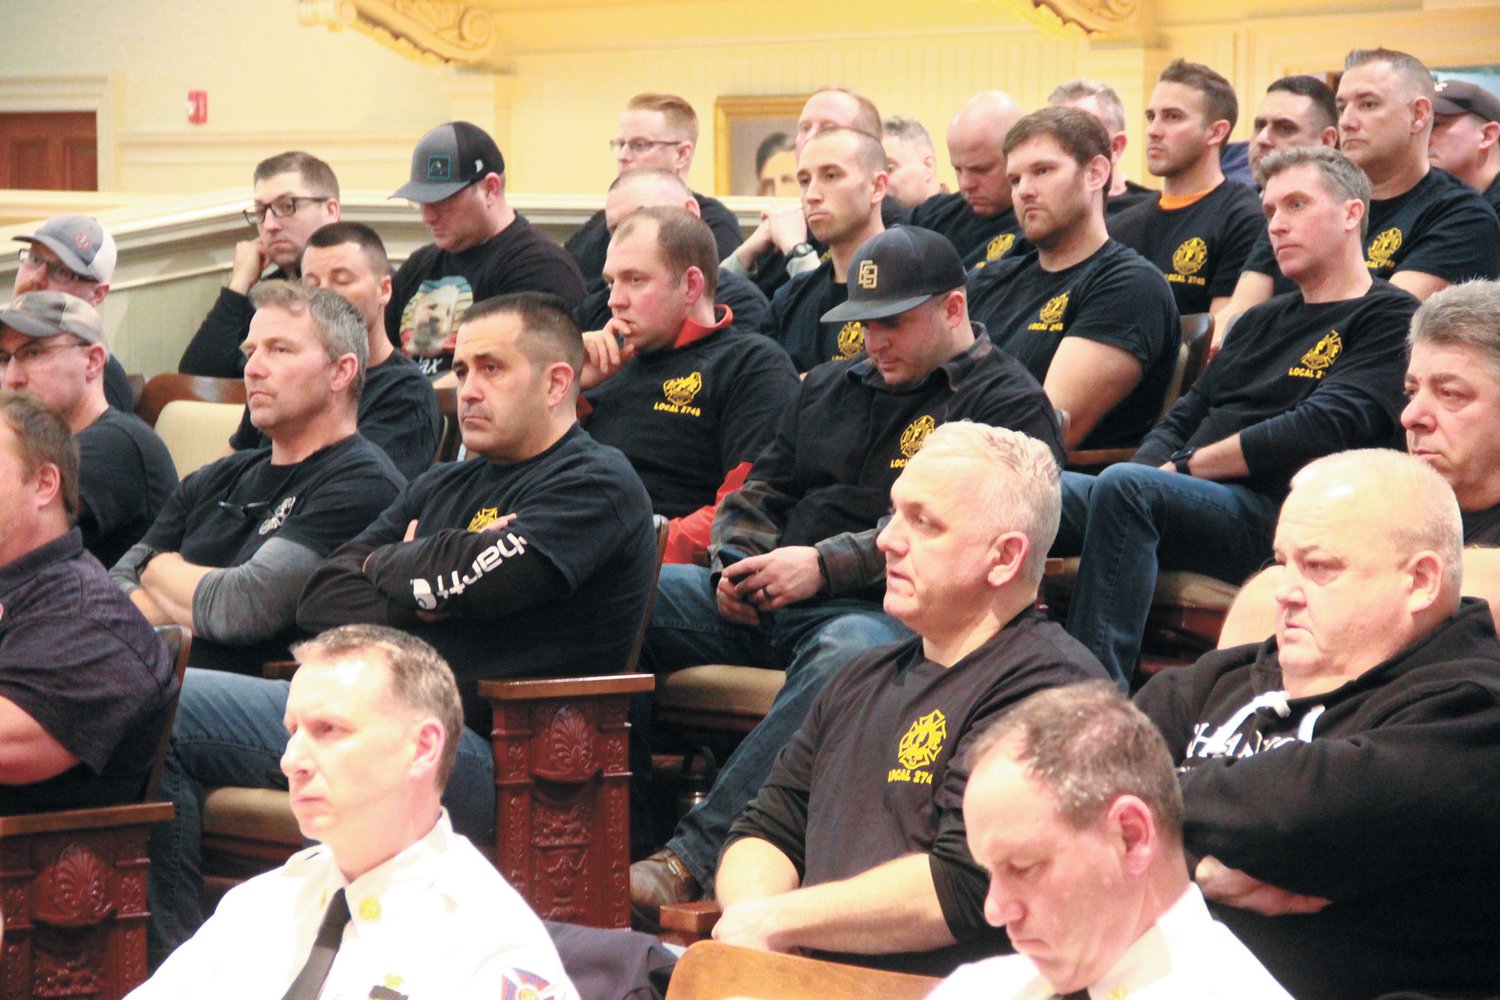 WHAT IT MEANS TO THEM: Warwick firefighters follow the discussion leading up to council ratification of a three-year contract.